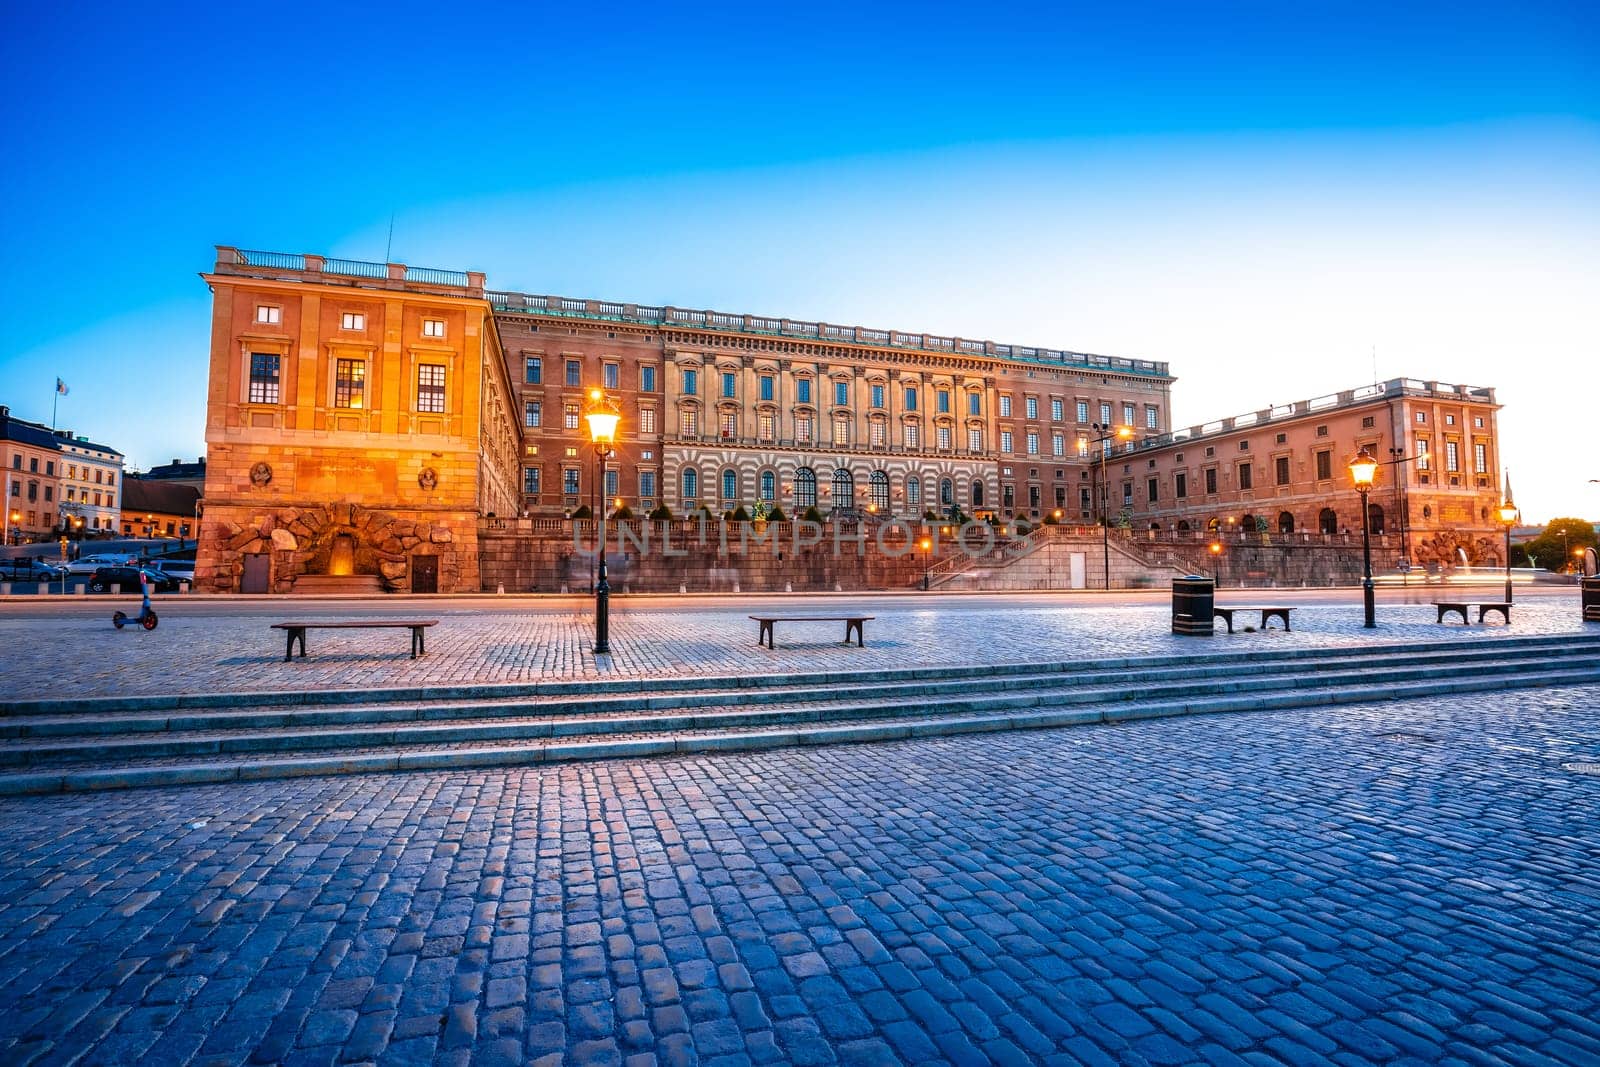 The Royal Palace Kungliga slottet in Stockholm evening view by xbrchx